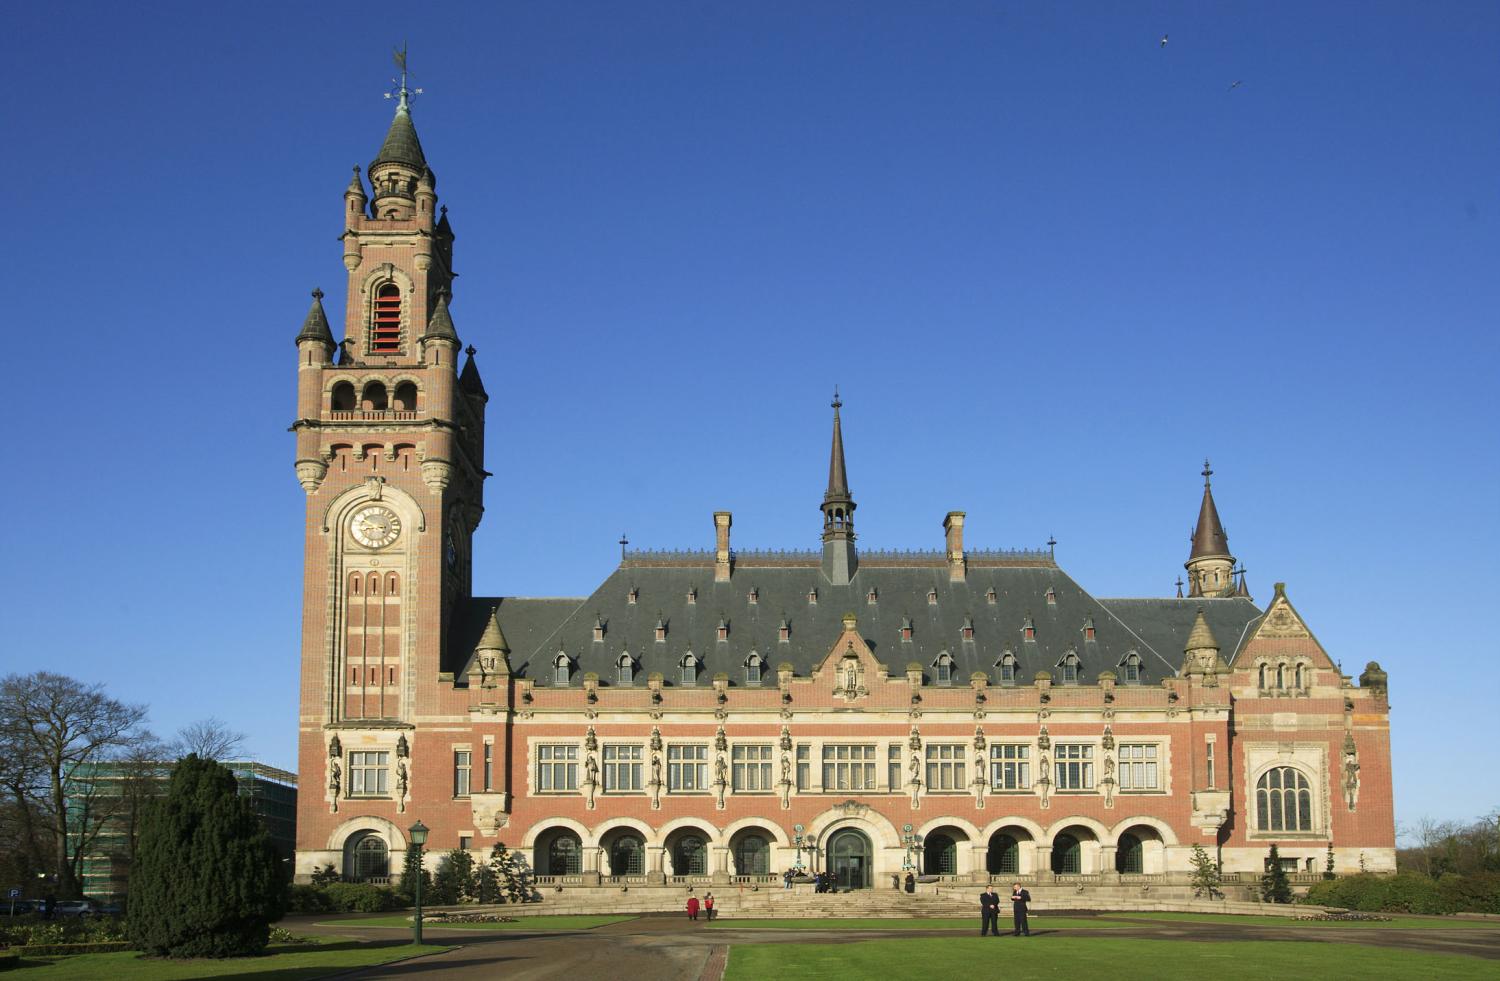 A general view of the exterior of the Peace Palace, seat of the International Court of Justice in The Hague, the Netherlands April 12, 2006. - RTXOHKM